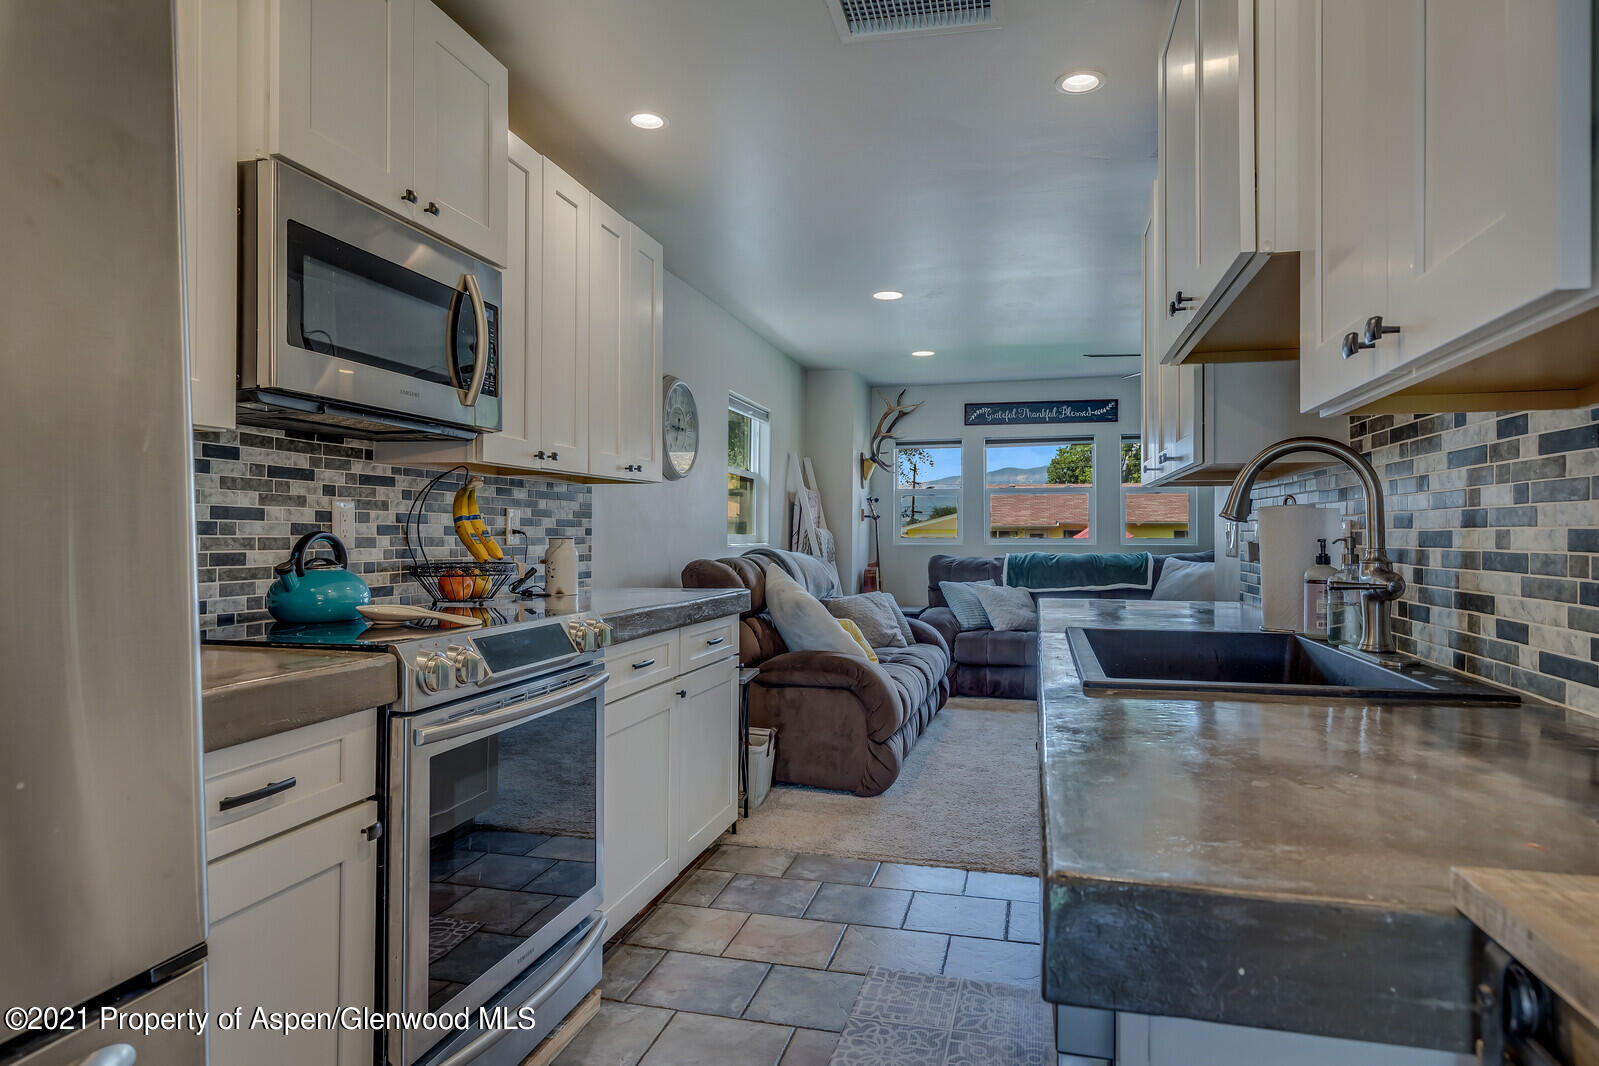 a kitchen with stainless steel appliances granite countertop a stove top oven a sink dishwasher and white cabinets with wooden floor